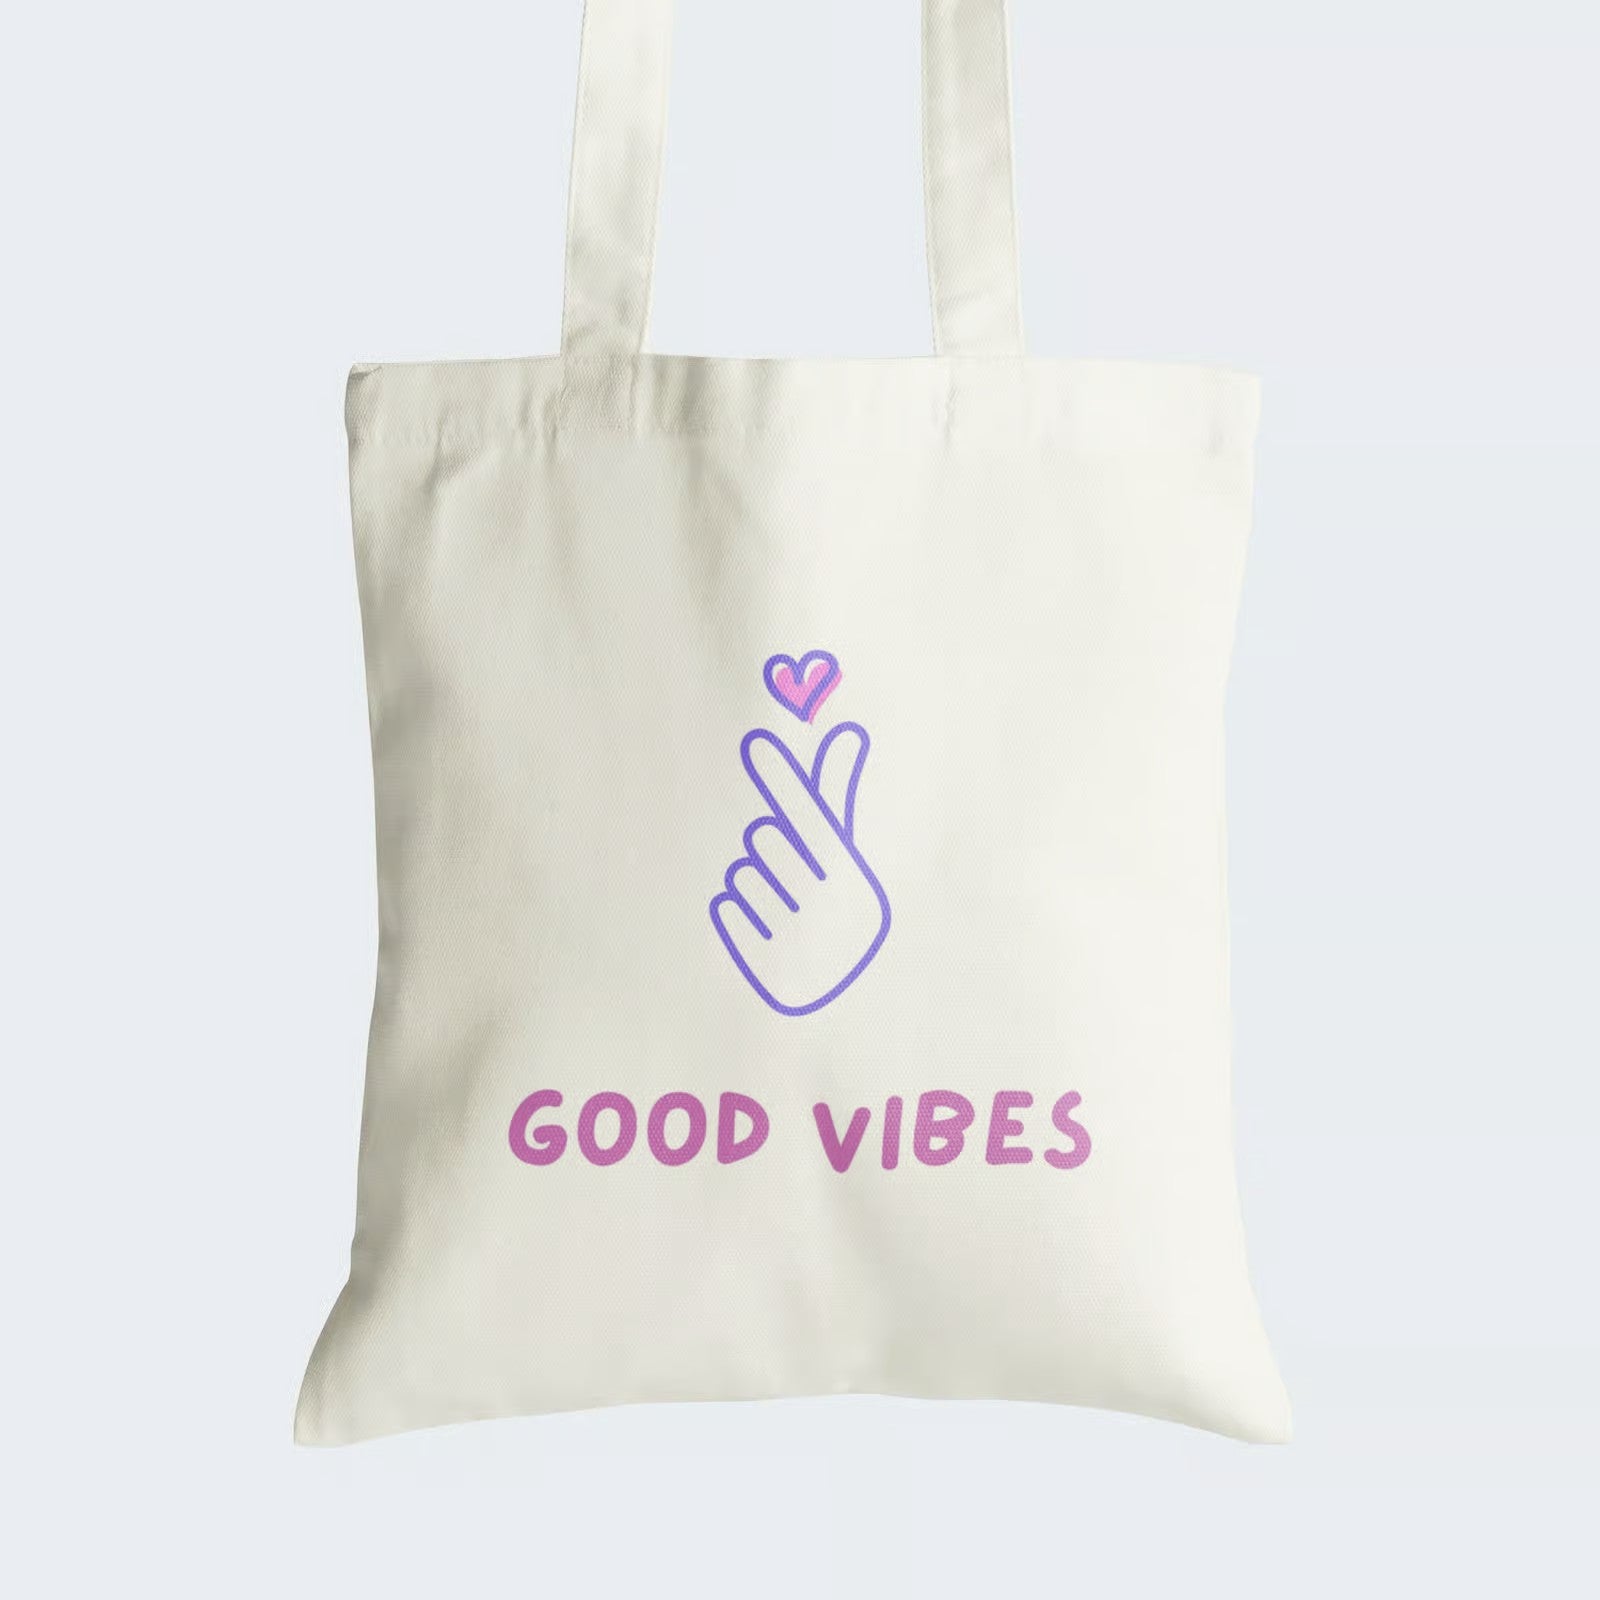 Elevate your style and radiate positivity with our "Good Vibes" Cotton Canvas Tote Bag. This tote features an endearing graphic of the mini heart hand gesture beneath a heart symbol, complemented by the inspiring caption "Good Vibes." With durable craftsmanship and a secure zipper closure, it's not just a bag; it's a statement of spreading positivity. Order yours today and carry good vibes everywhere!